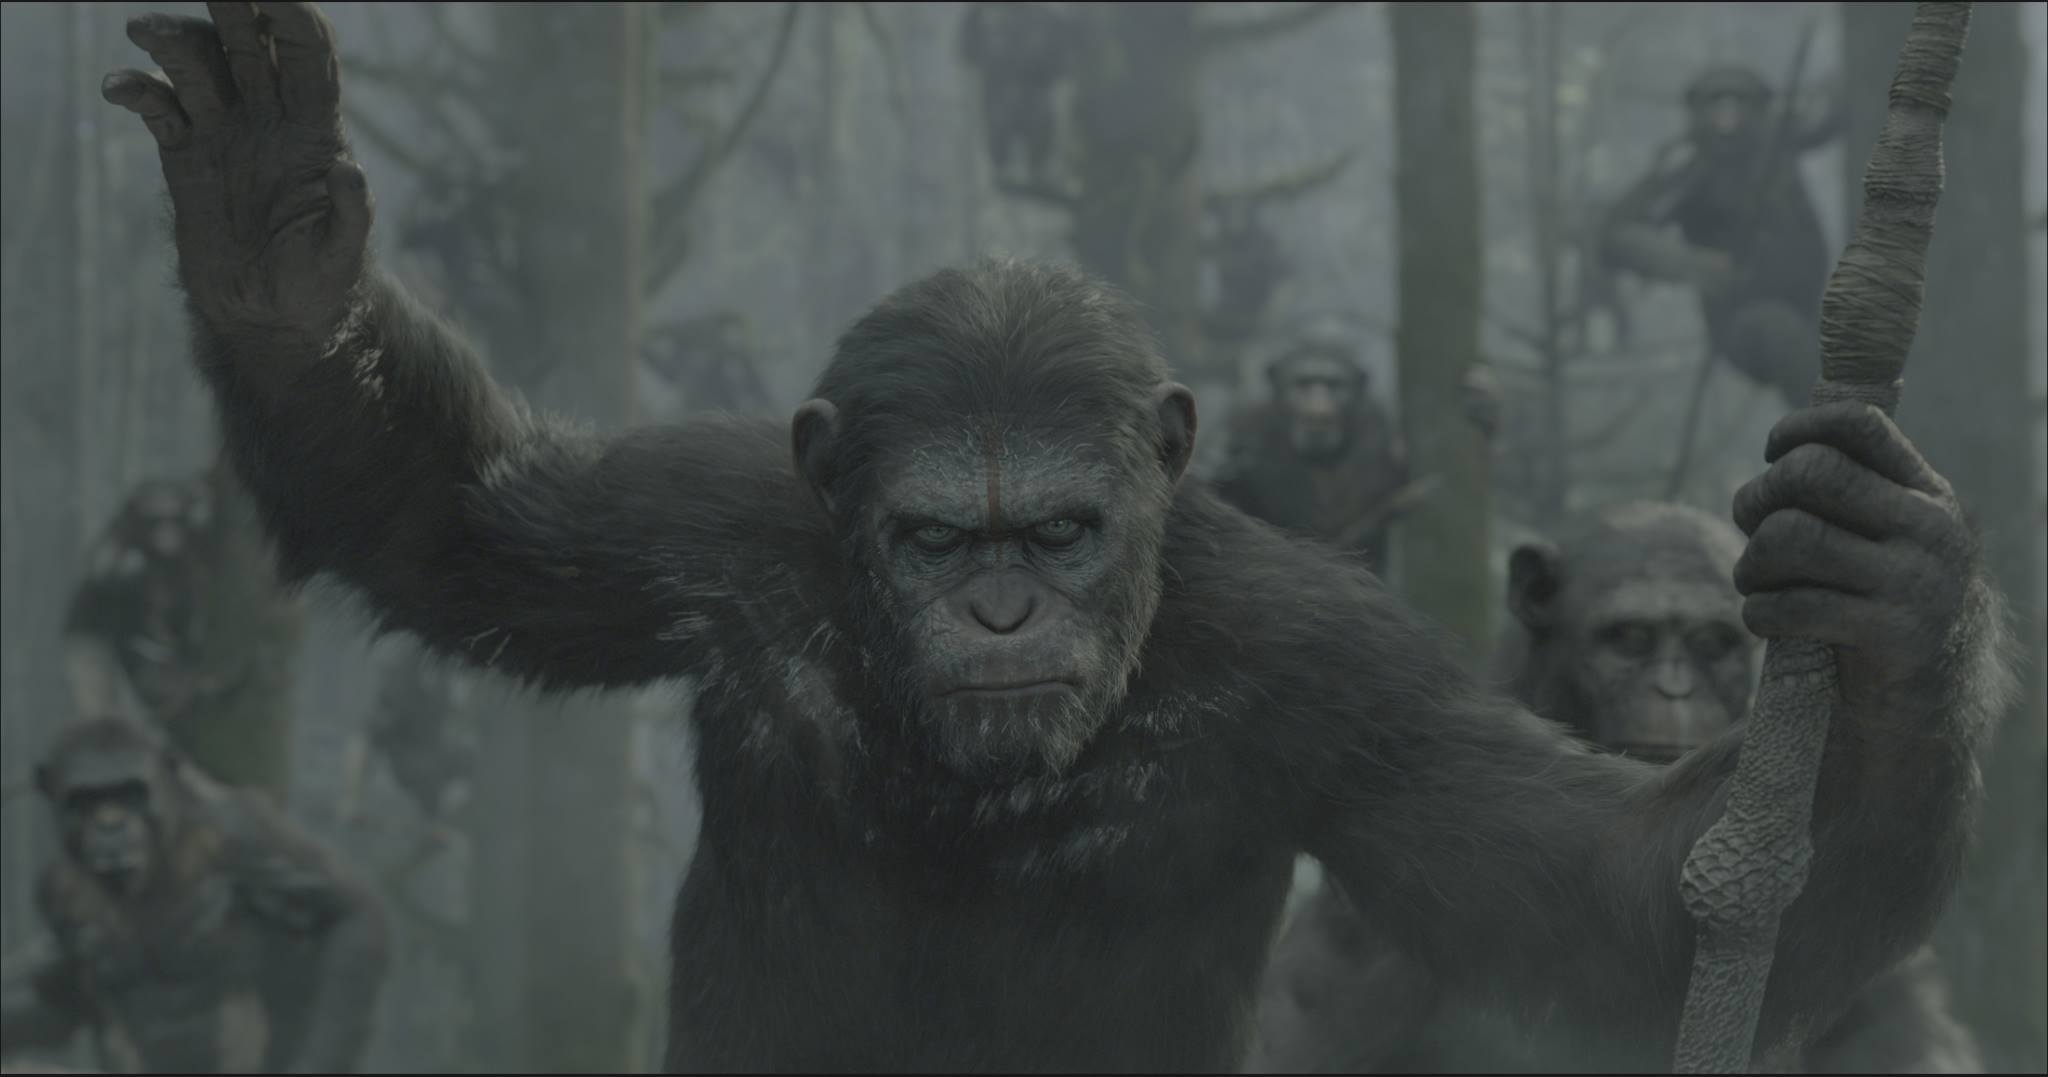 caesar-dawn-of-the-planet-of-the-apes.jpg